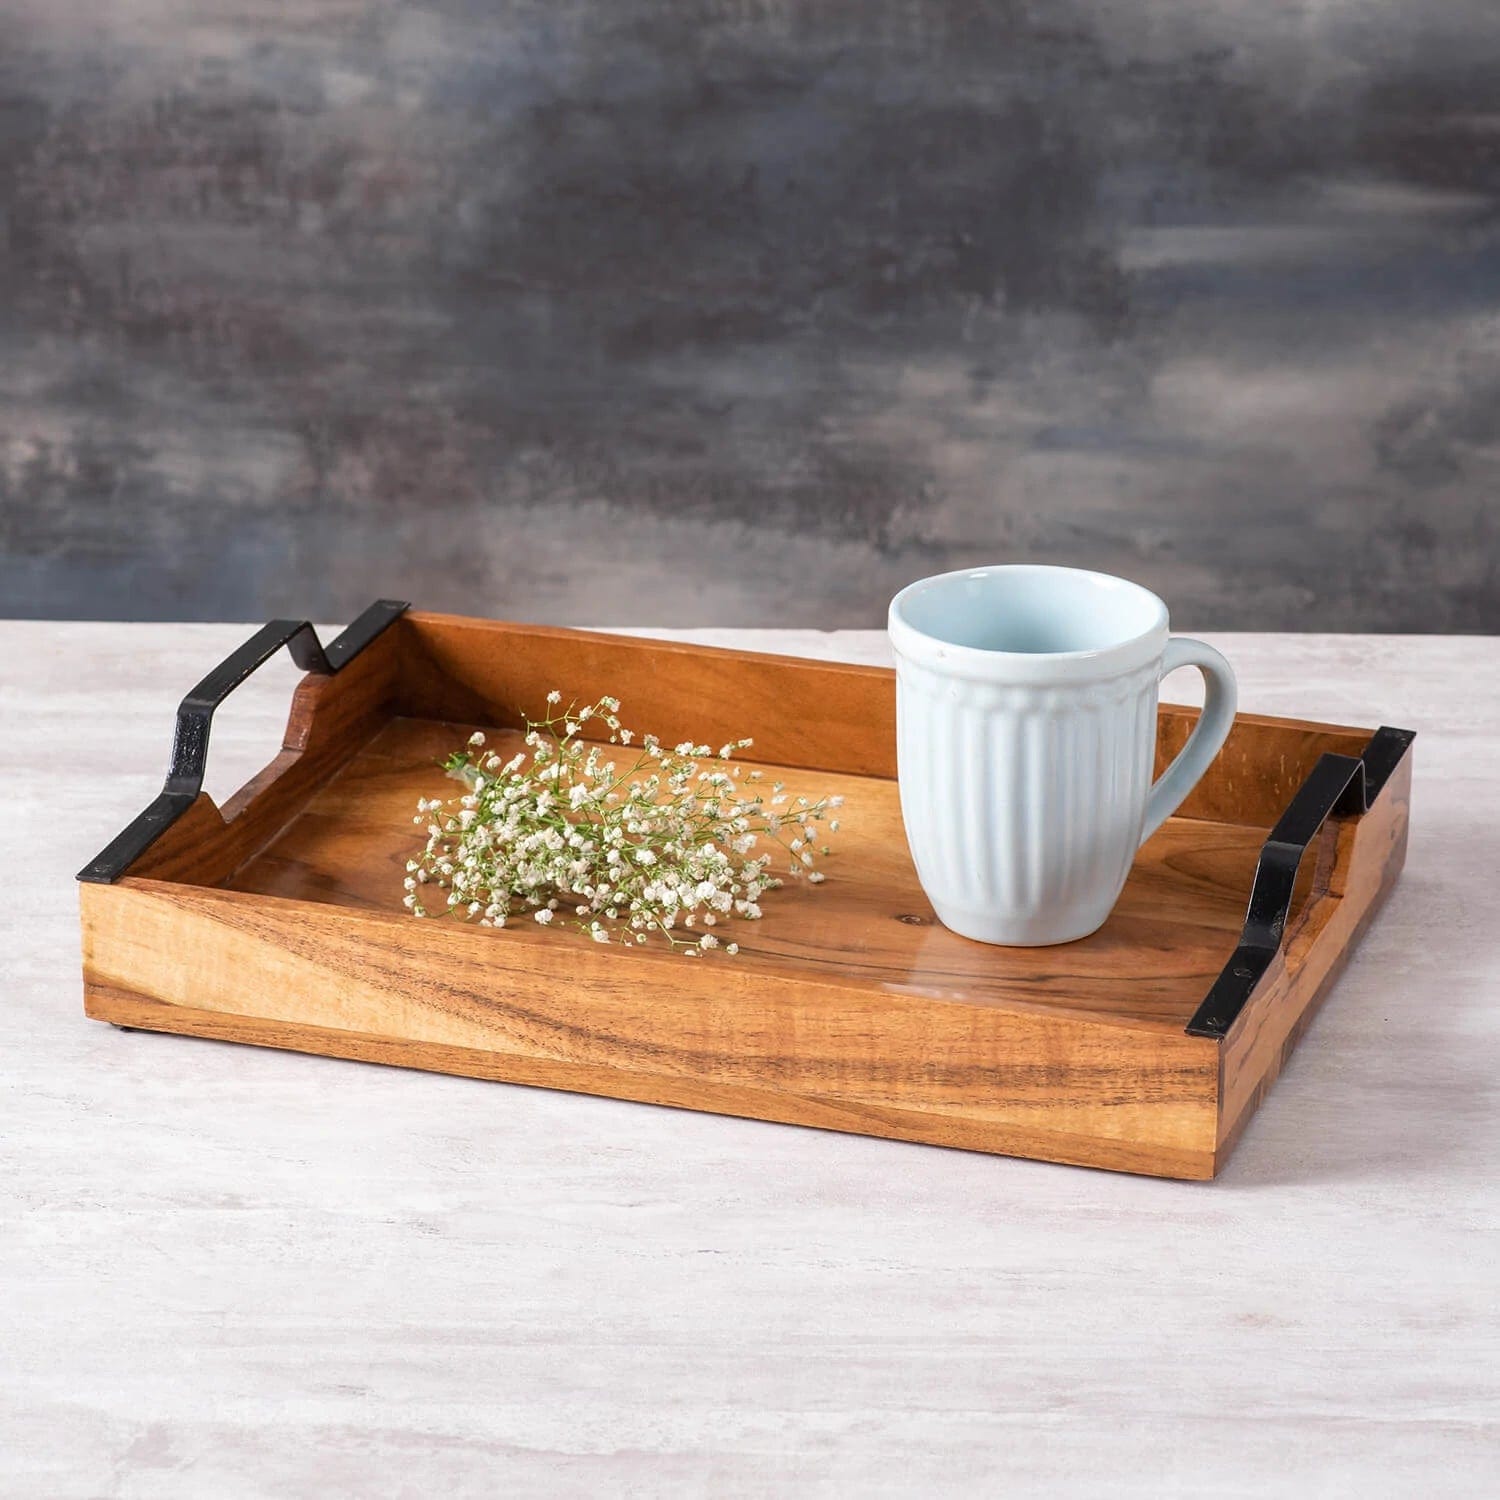 Serving Tray Sets: Buy Wooden Serving Tray Online in India at Best ...